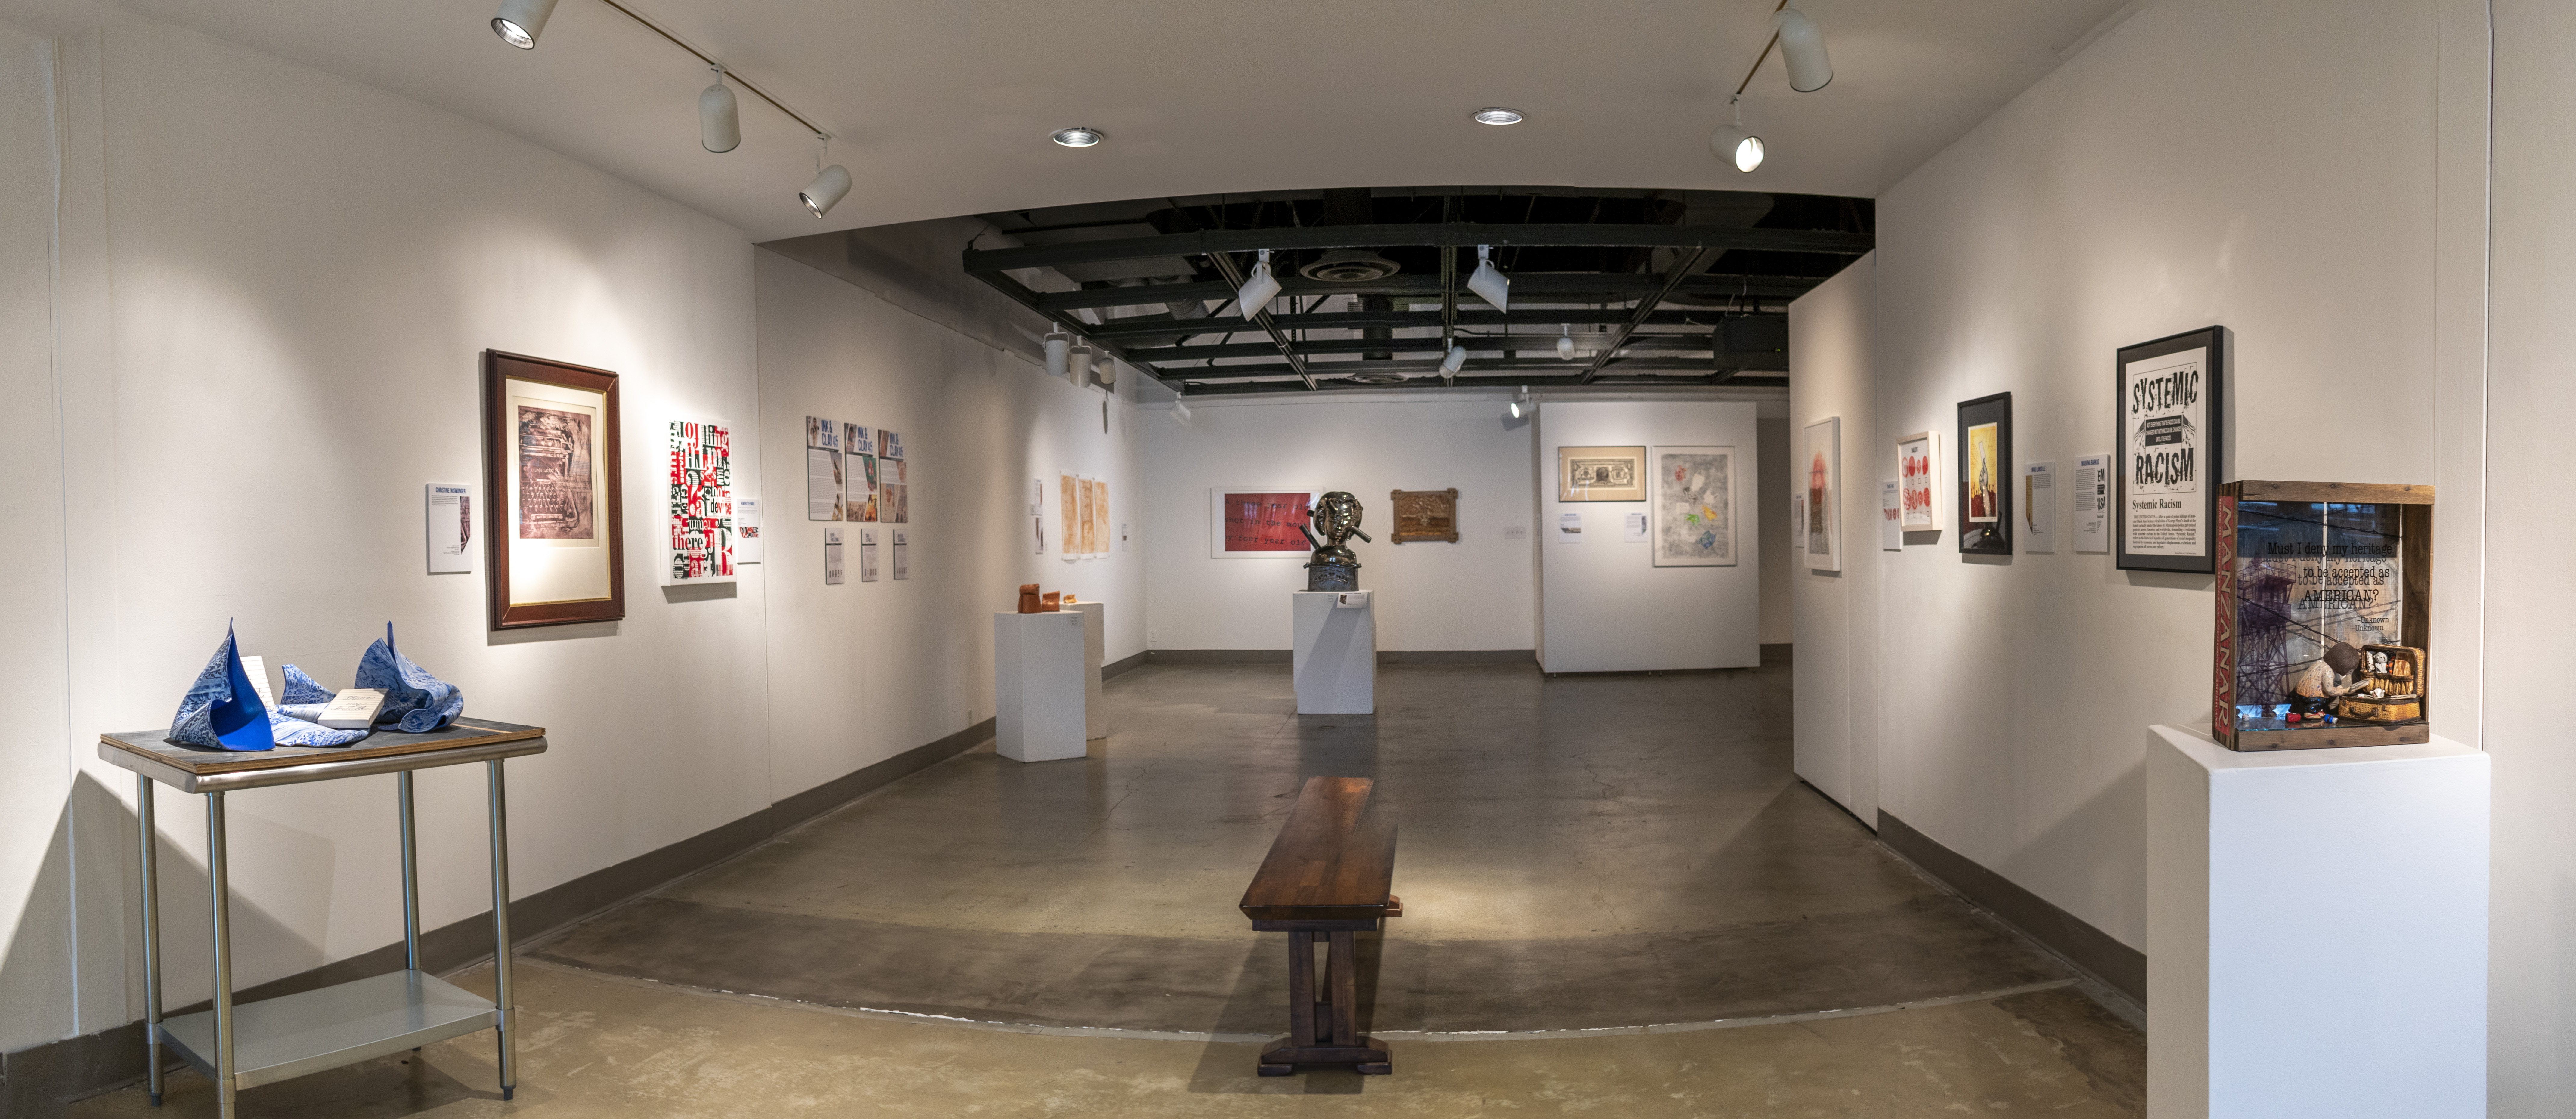 Installation View, Gallery Corridor, Ink & Clay 45 Exhibition, August 18, 2022 to November 17, 2022